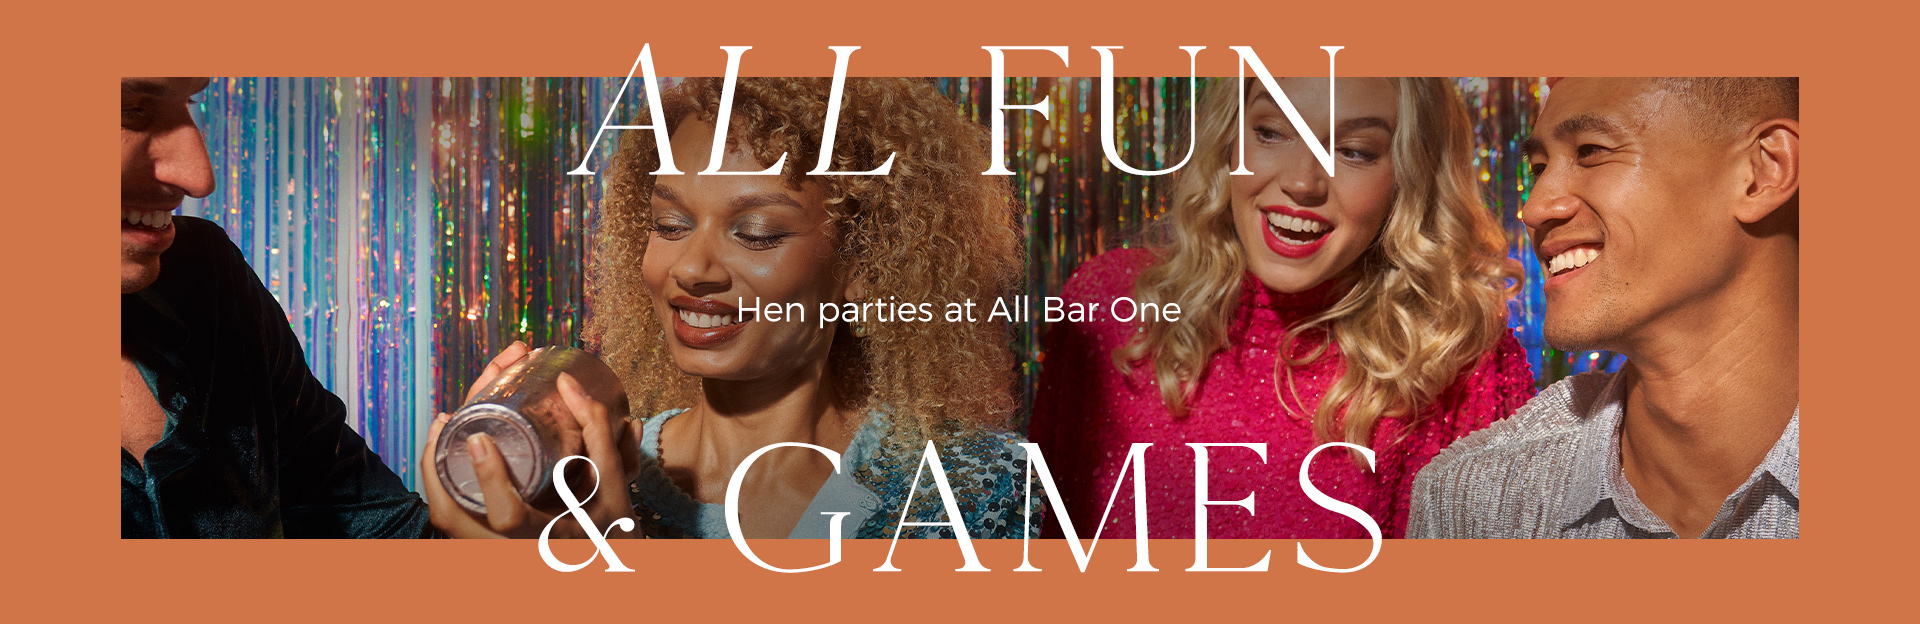 Hen parties at All Bar One Stratford Upon Avon